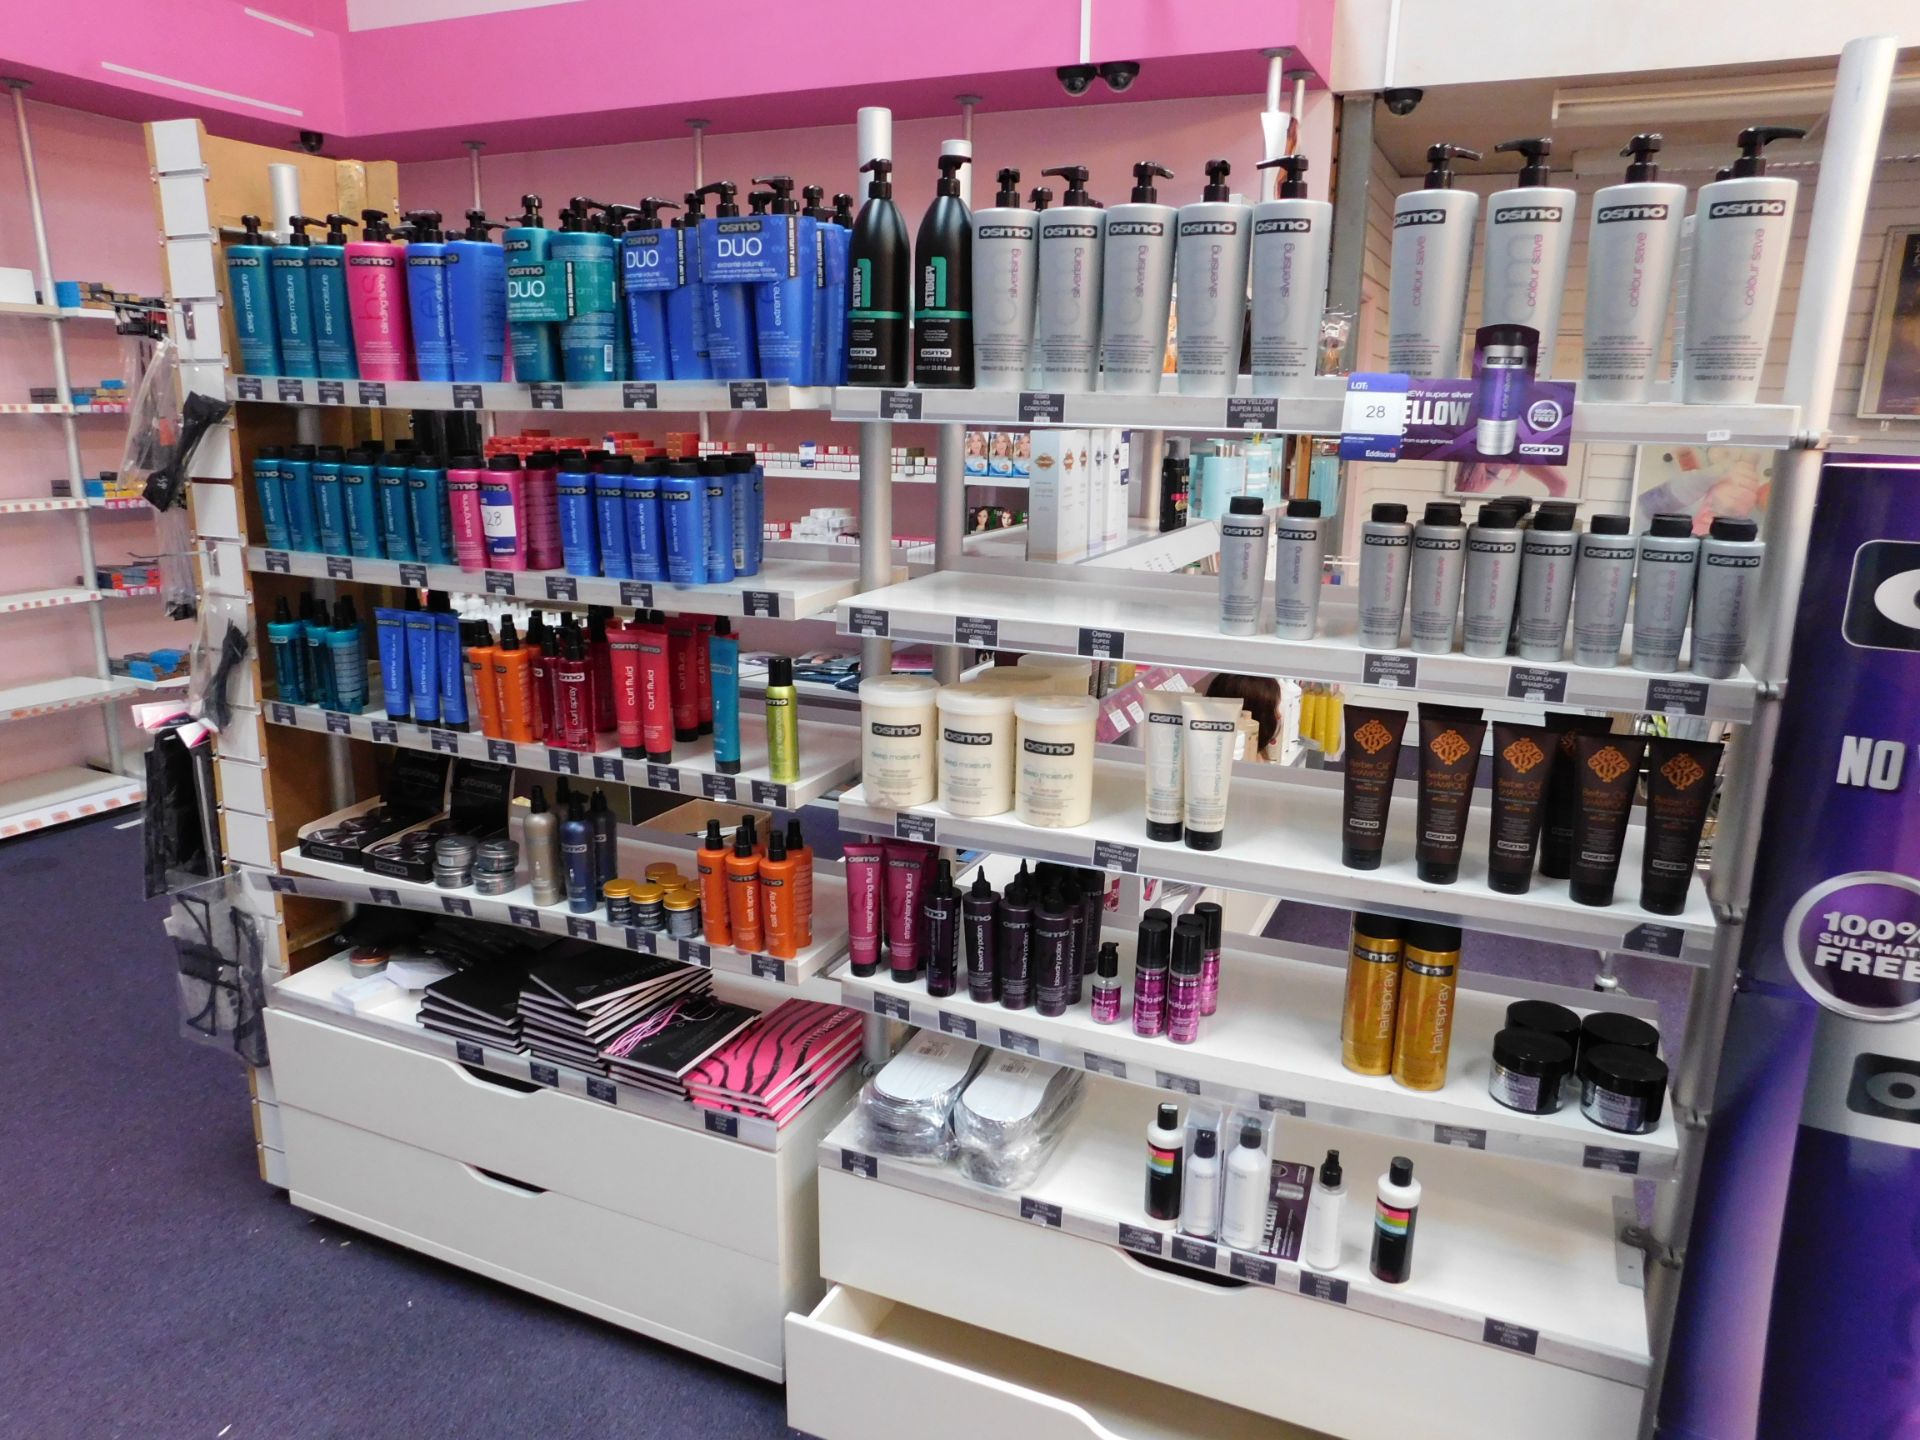 2 x Bays of shop display shelving and contents, including assortment of Osmo shampoos and